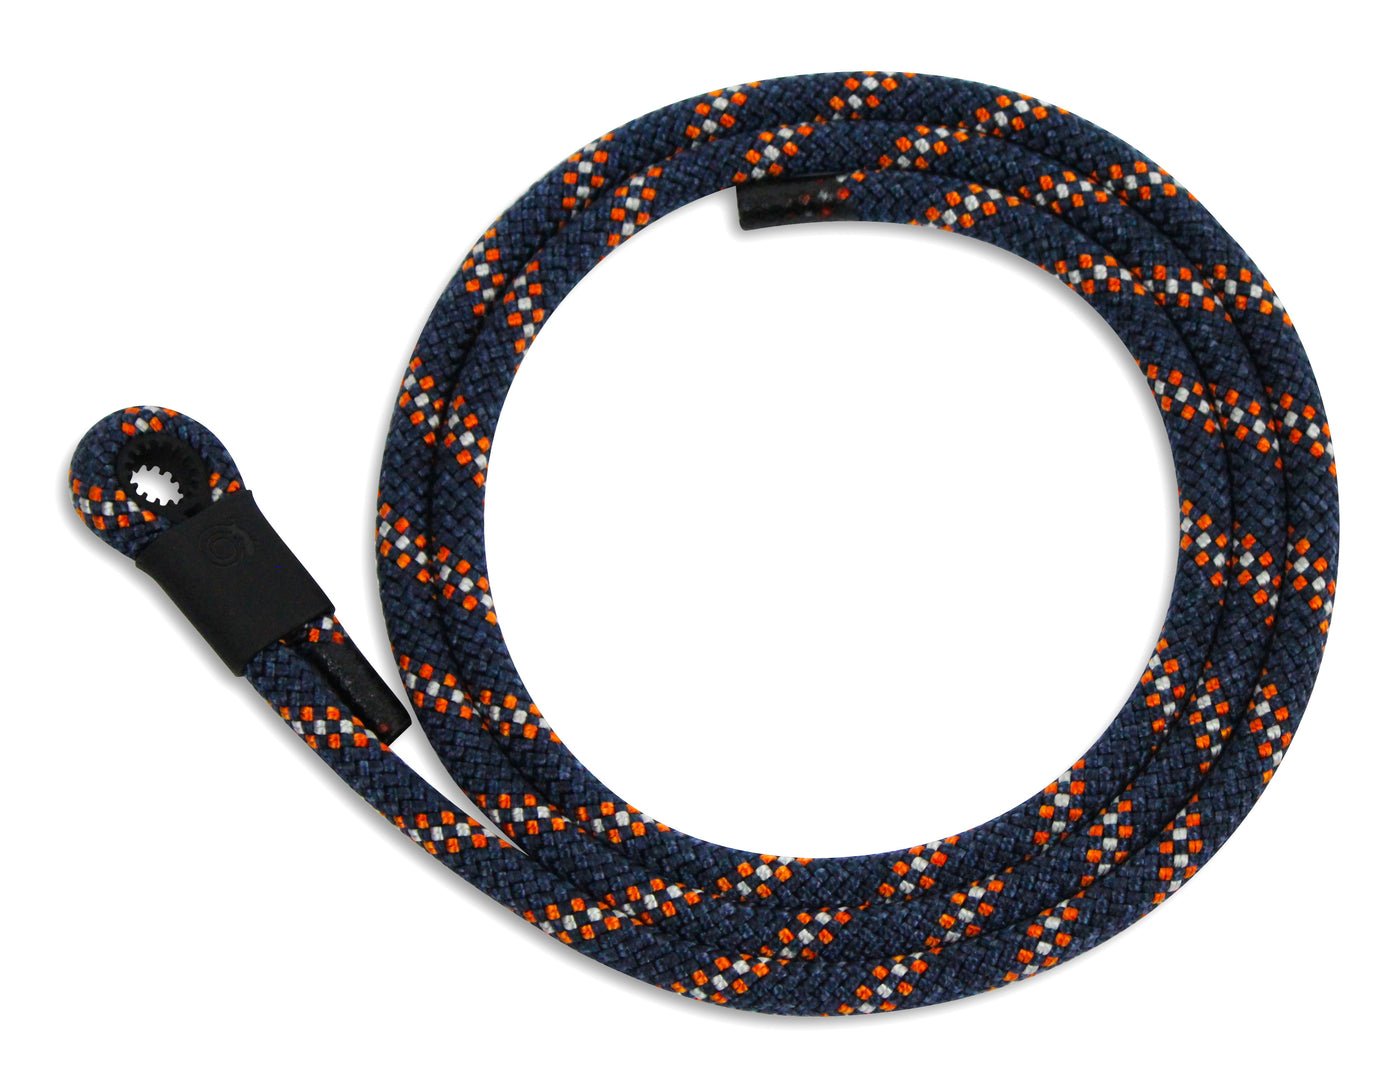 Lizard Tail Belts Radoo navy with orange and light highlight rope belt